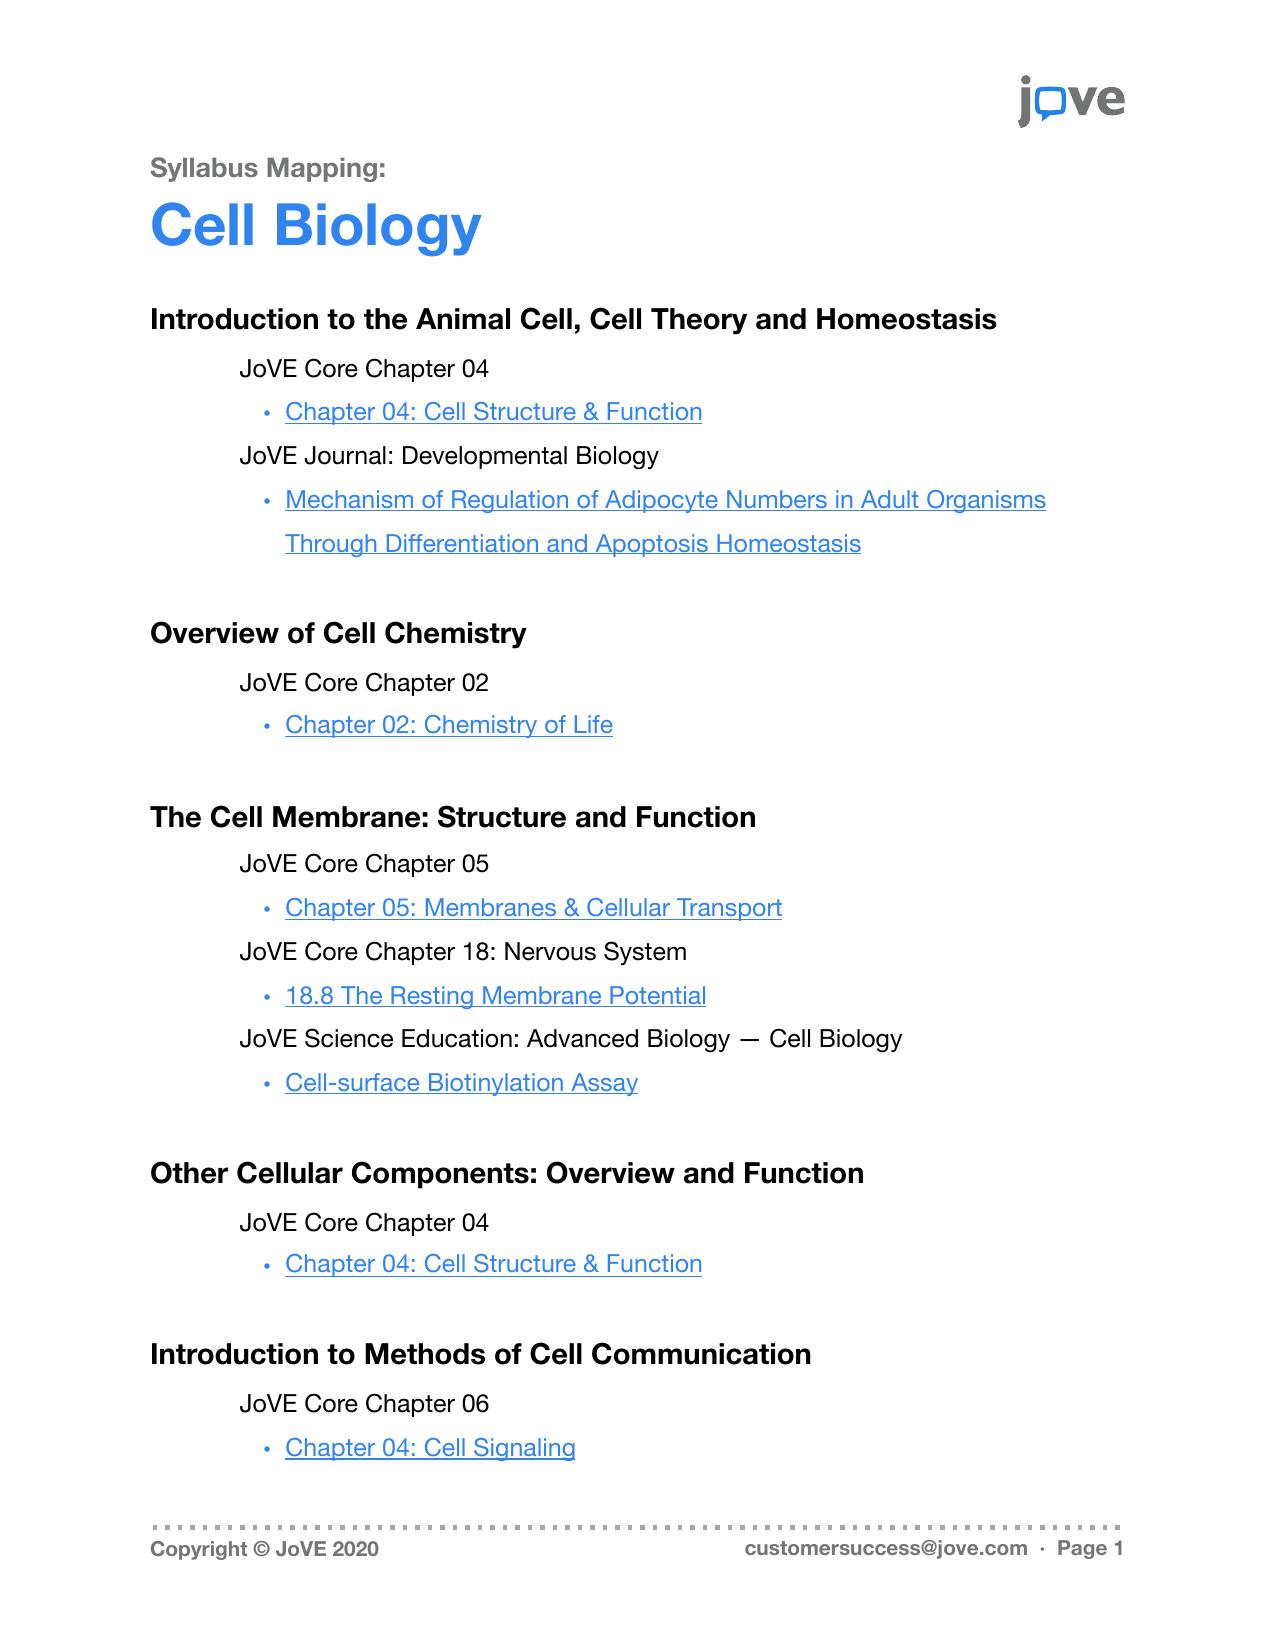 JoVE Syllabus Mapping - Cell Biology